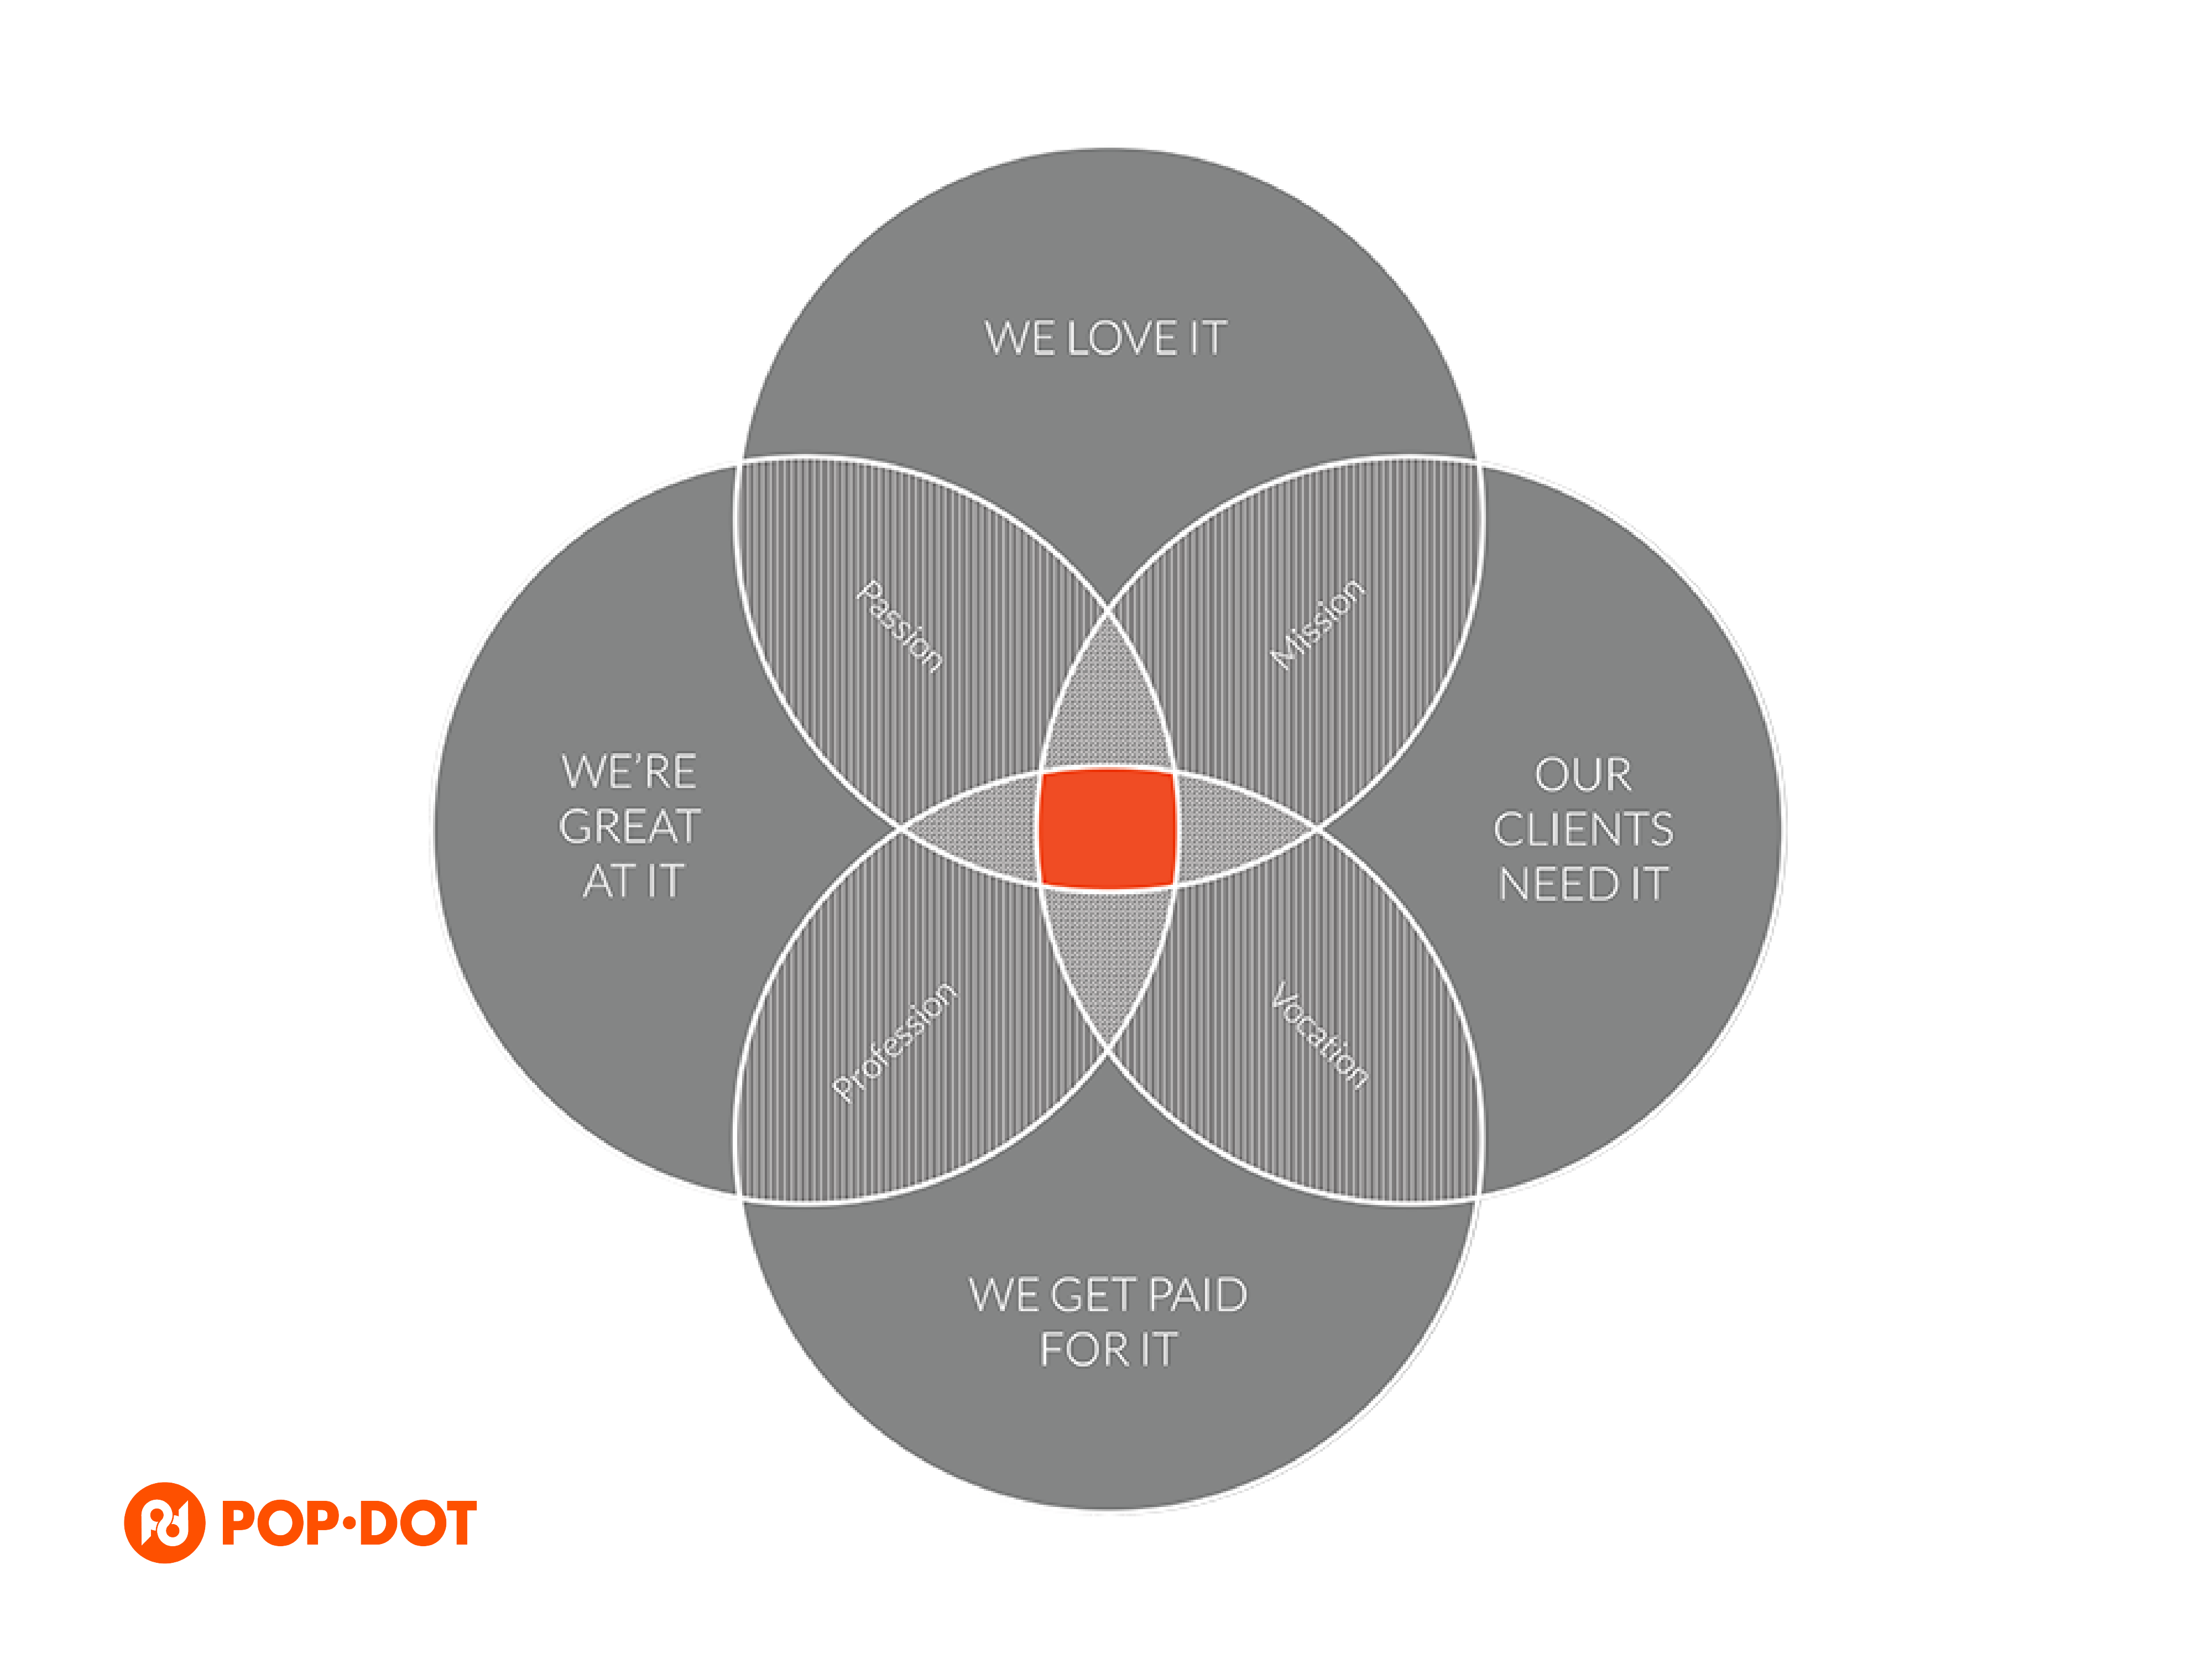 Your purpose and a career at Pop-Dot